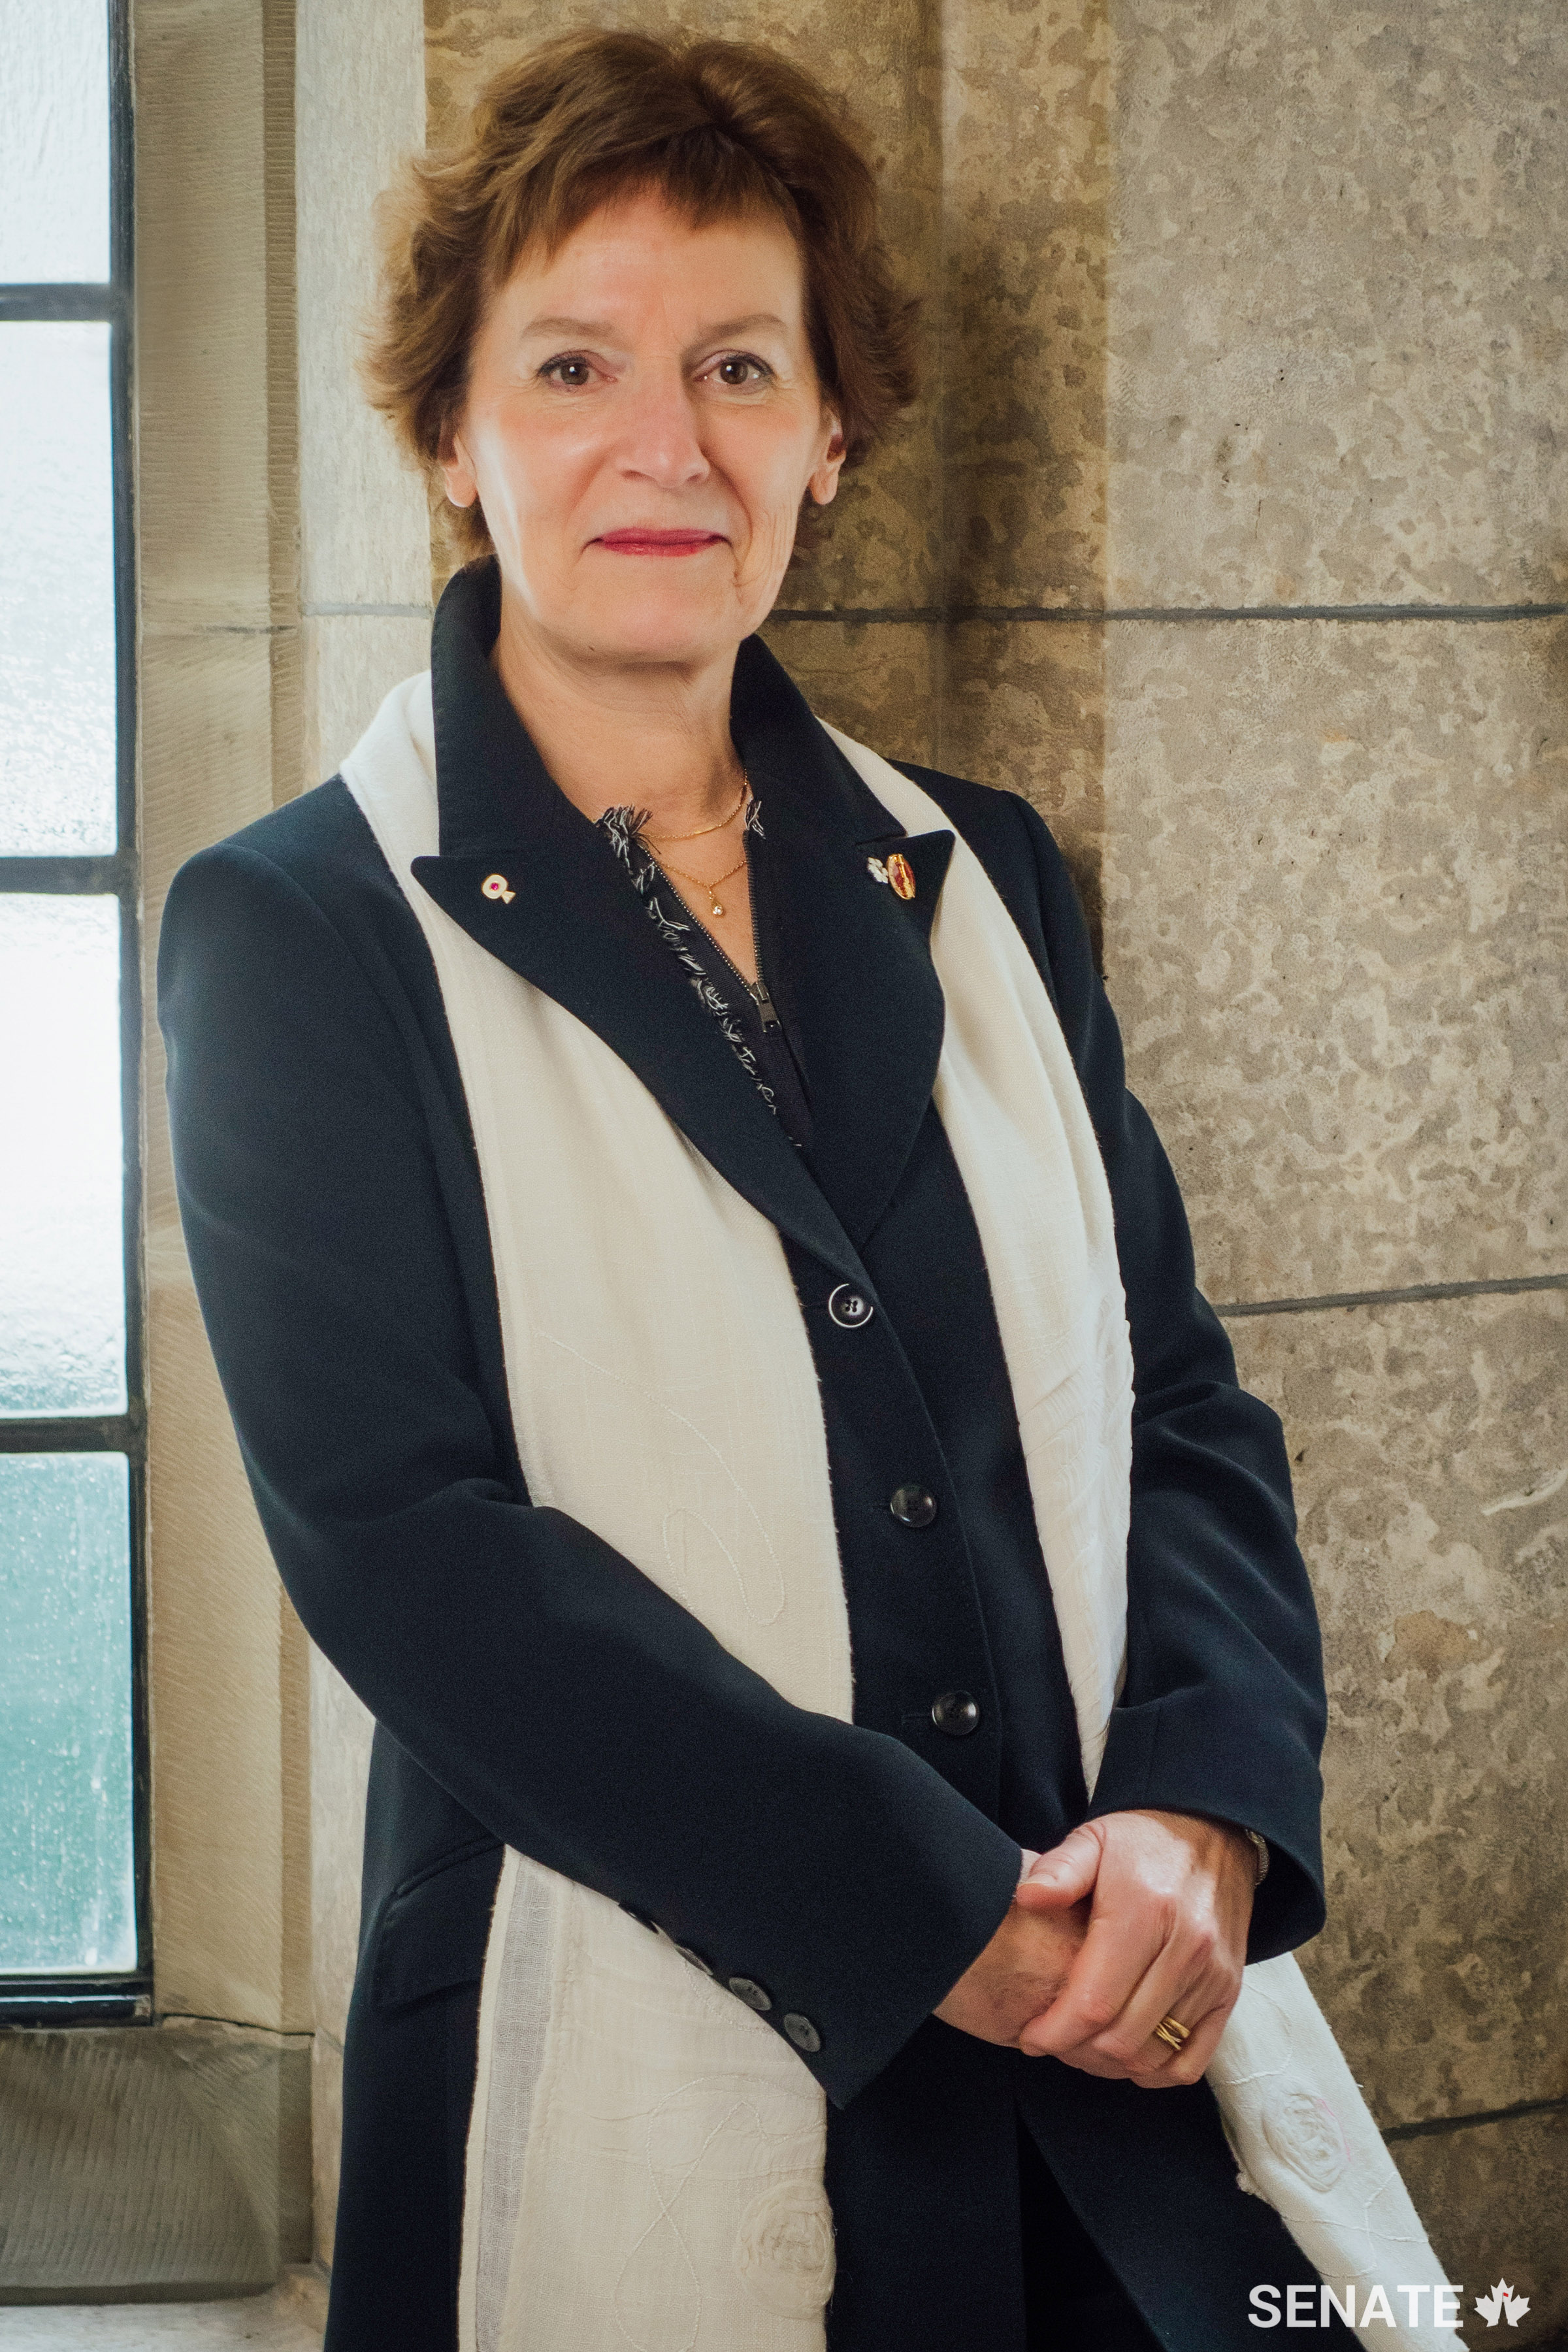 Senator Dupuis was appointed to the Red Chamber in November 2016, where she represents the Laurentides region in eastern and northeastern Quebec.